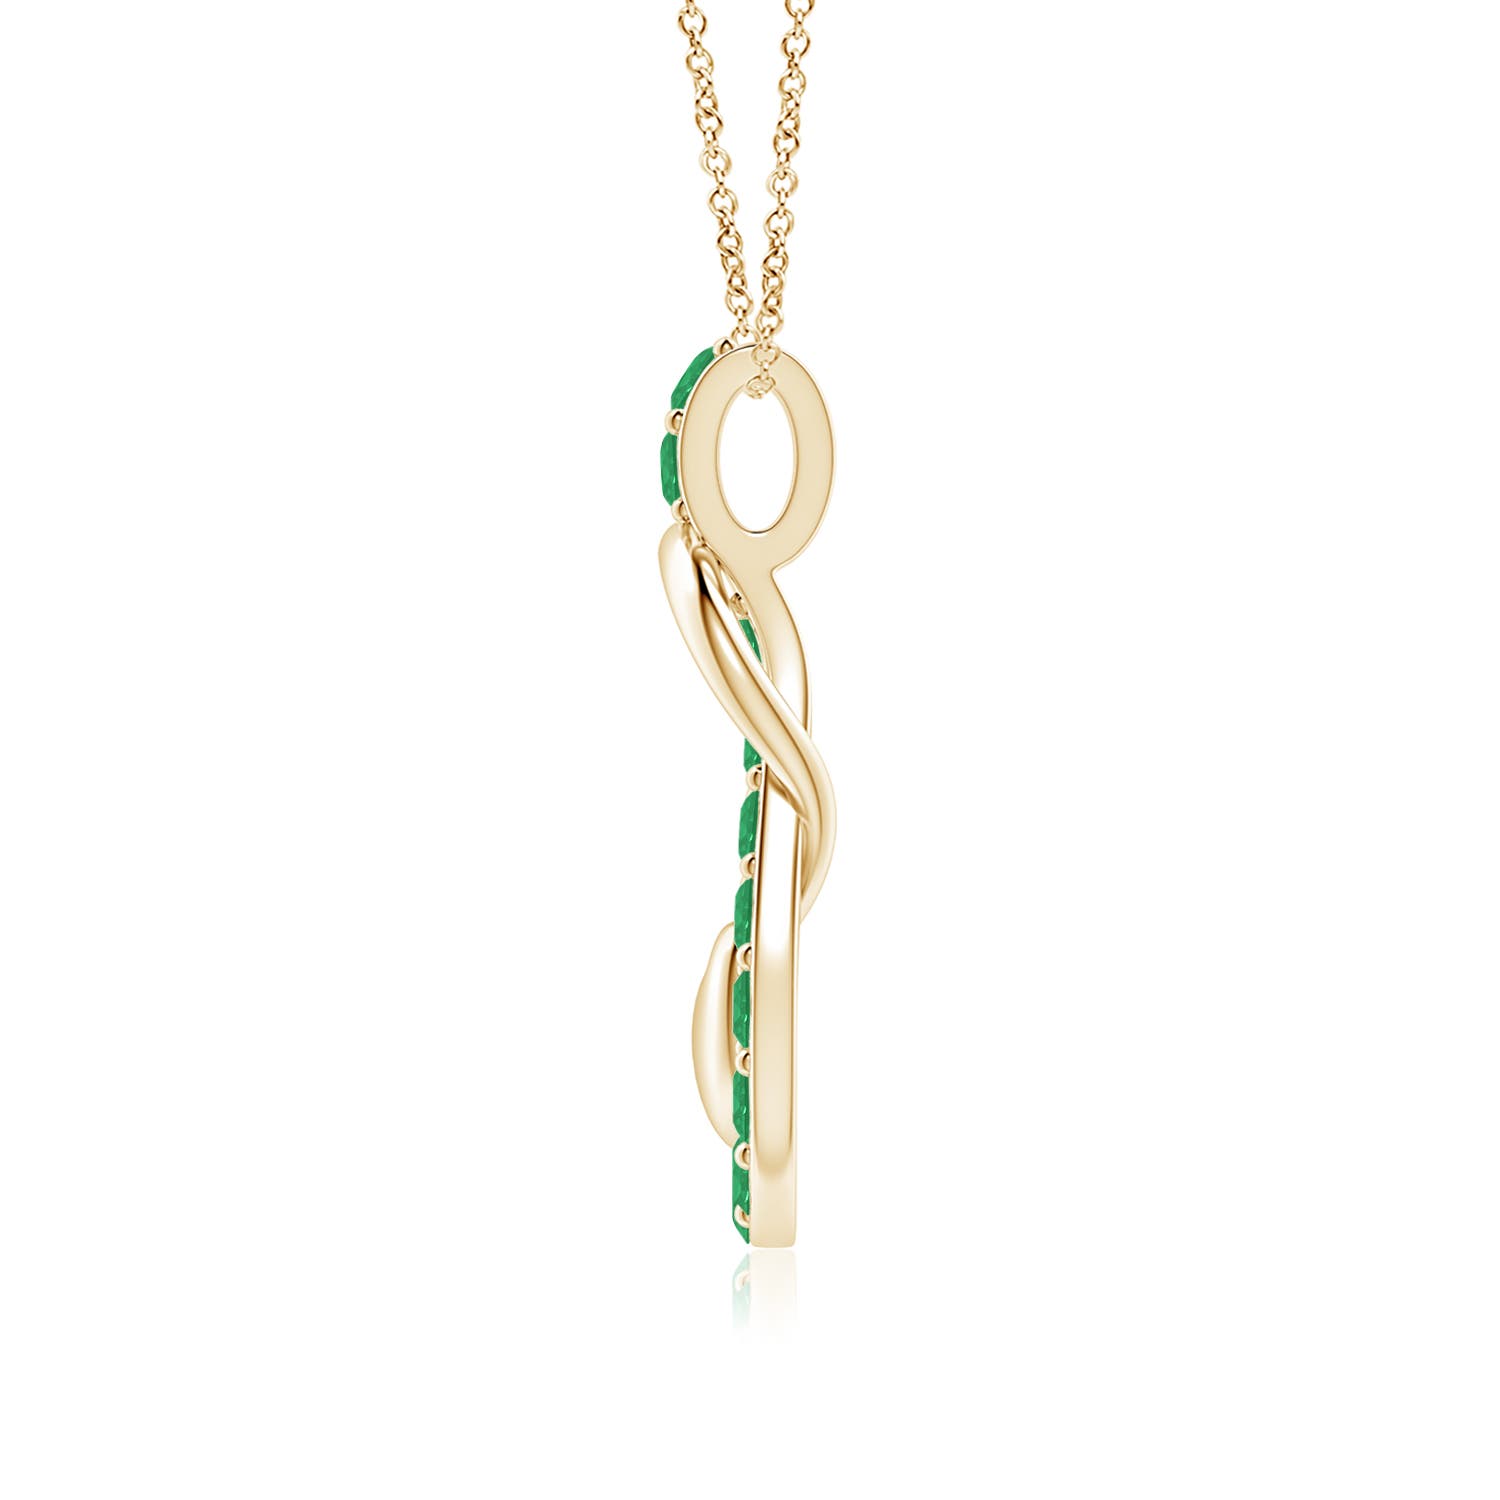 A - Emerald / 1.9 CT / 14 KT Yellow Gold